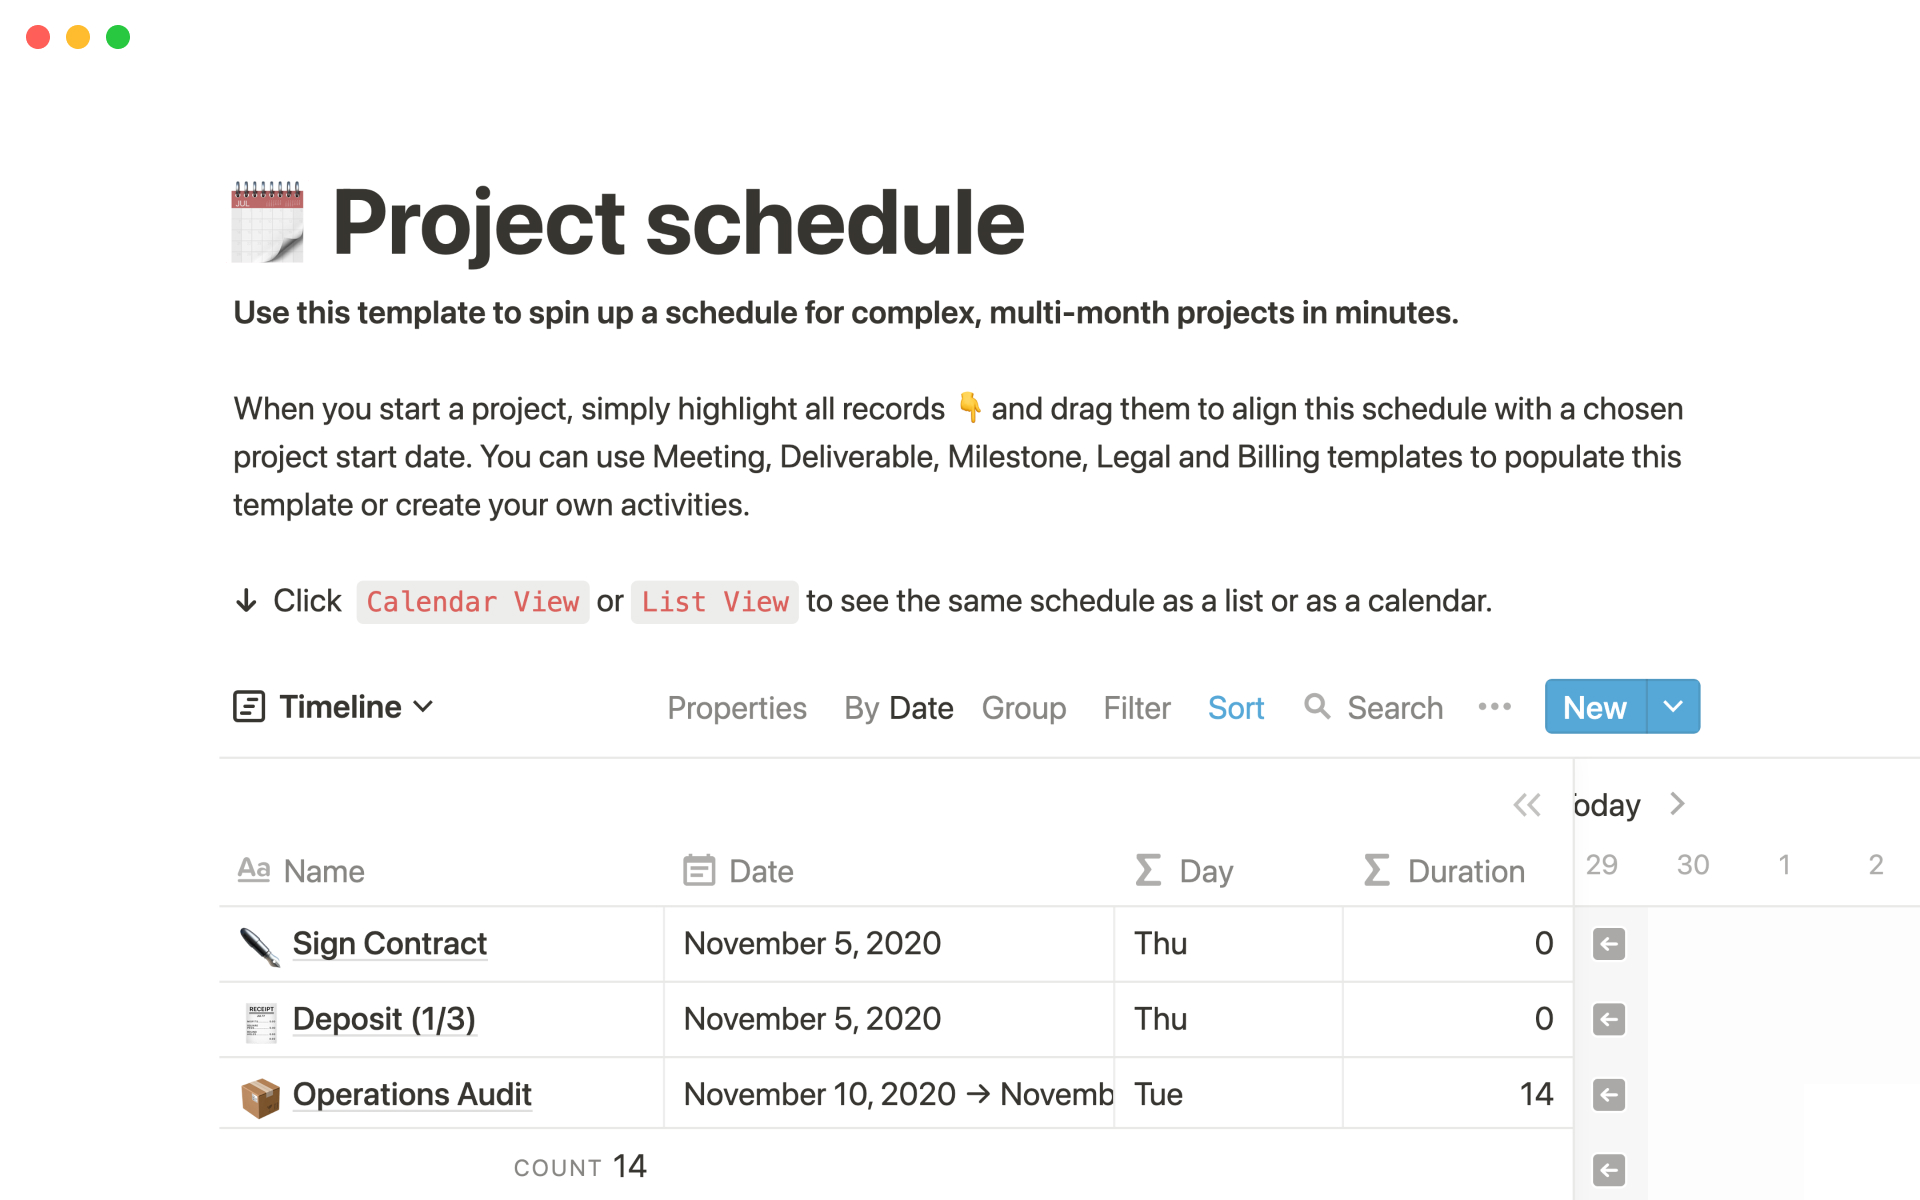 Spin up a schedule for complex, multi-month projects in minutes.